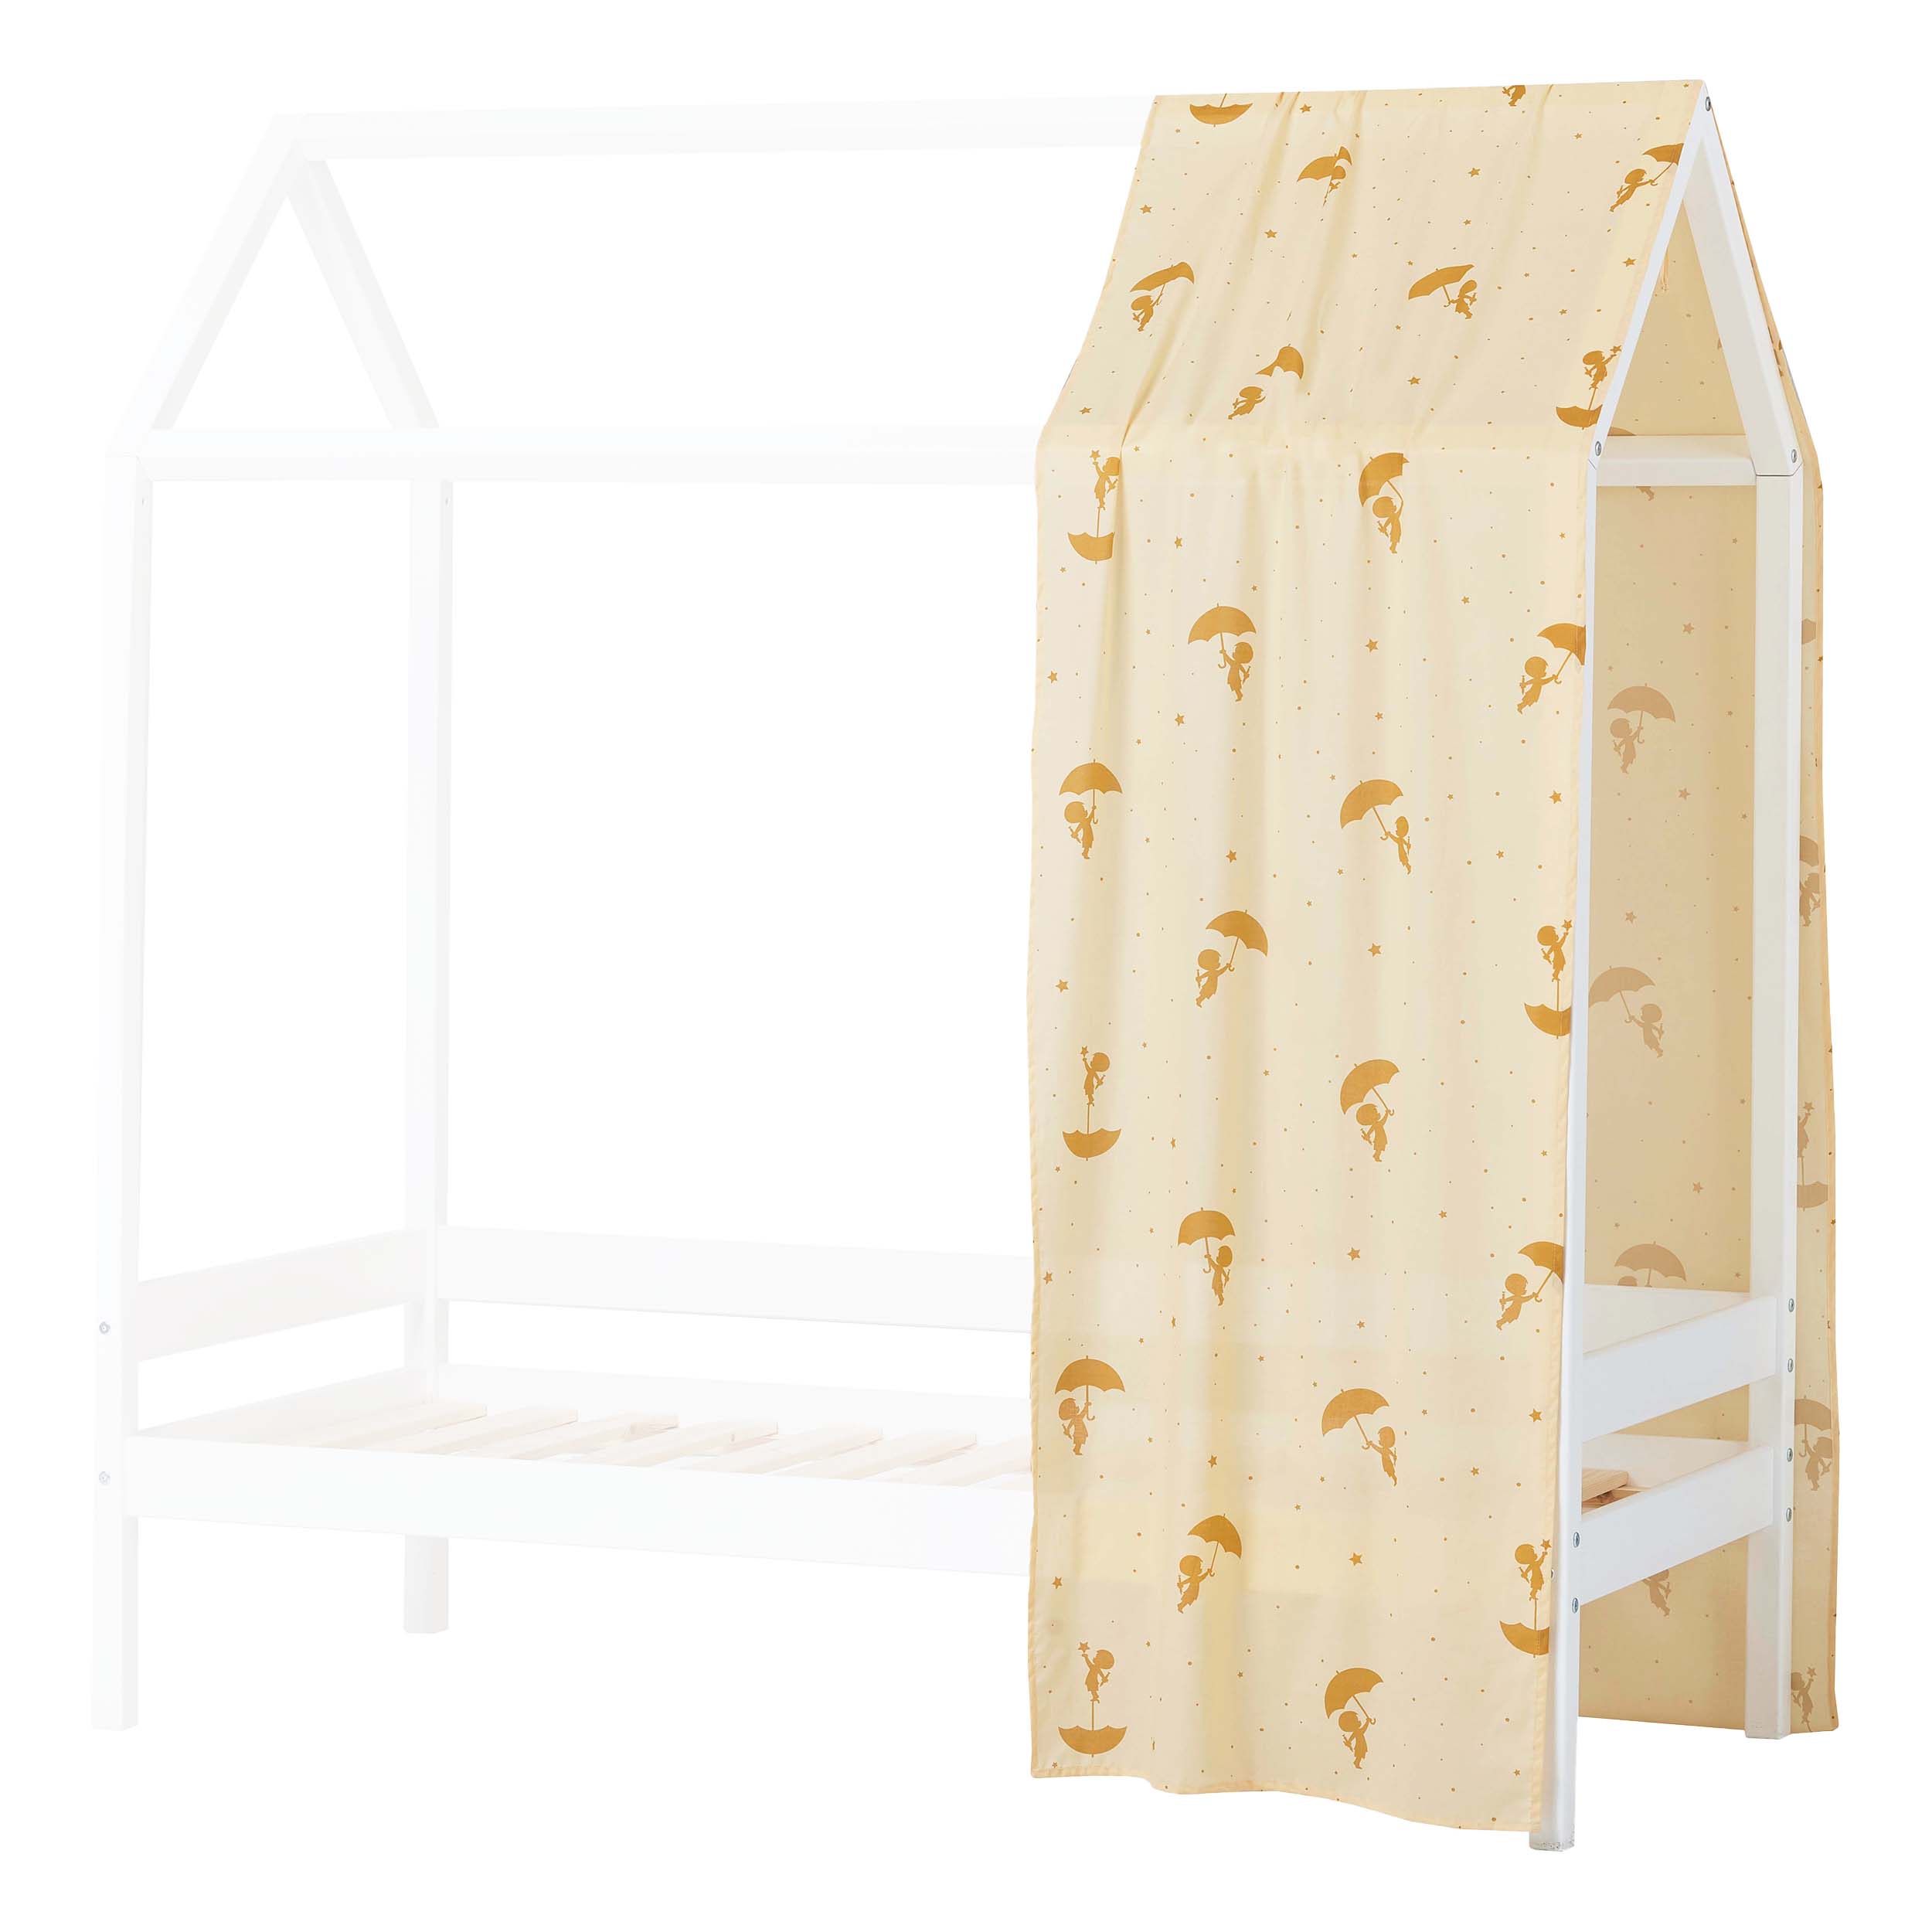 Hoppekids Ole Lukoie Bed Curtain for House Bed, Yellow